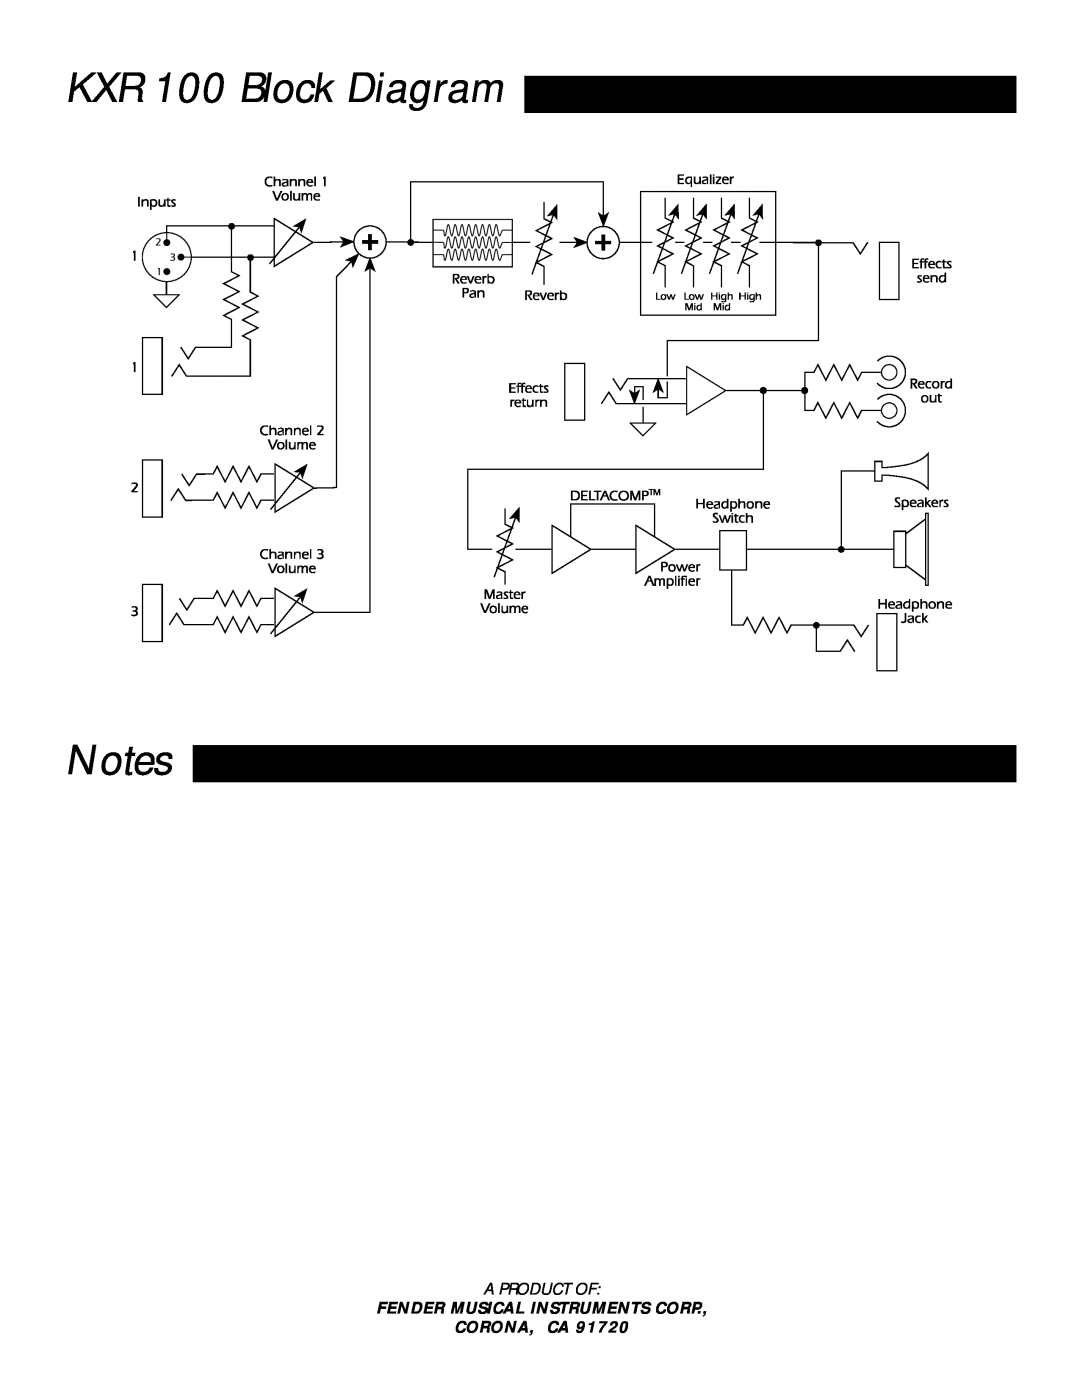 Fender owner manual KXR 100 Block Diagram Notes, A Product Of, Fender Musical Instruments Corp, Corona, Ca 